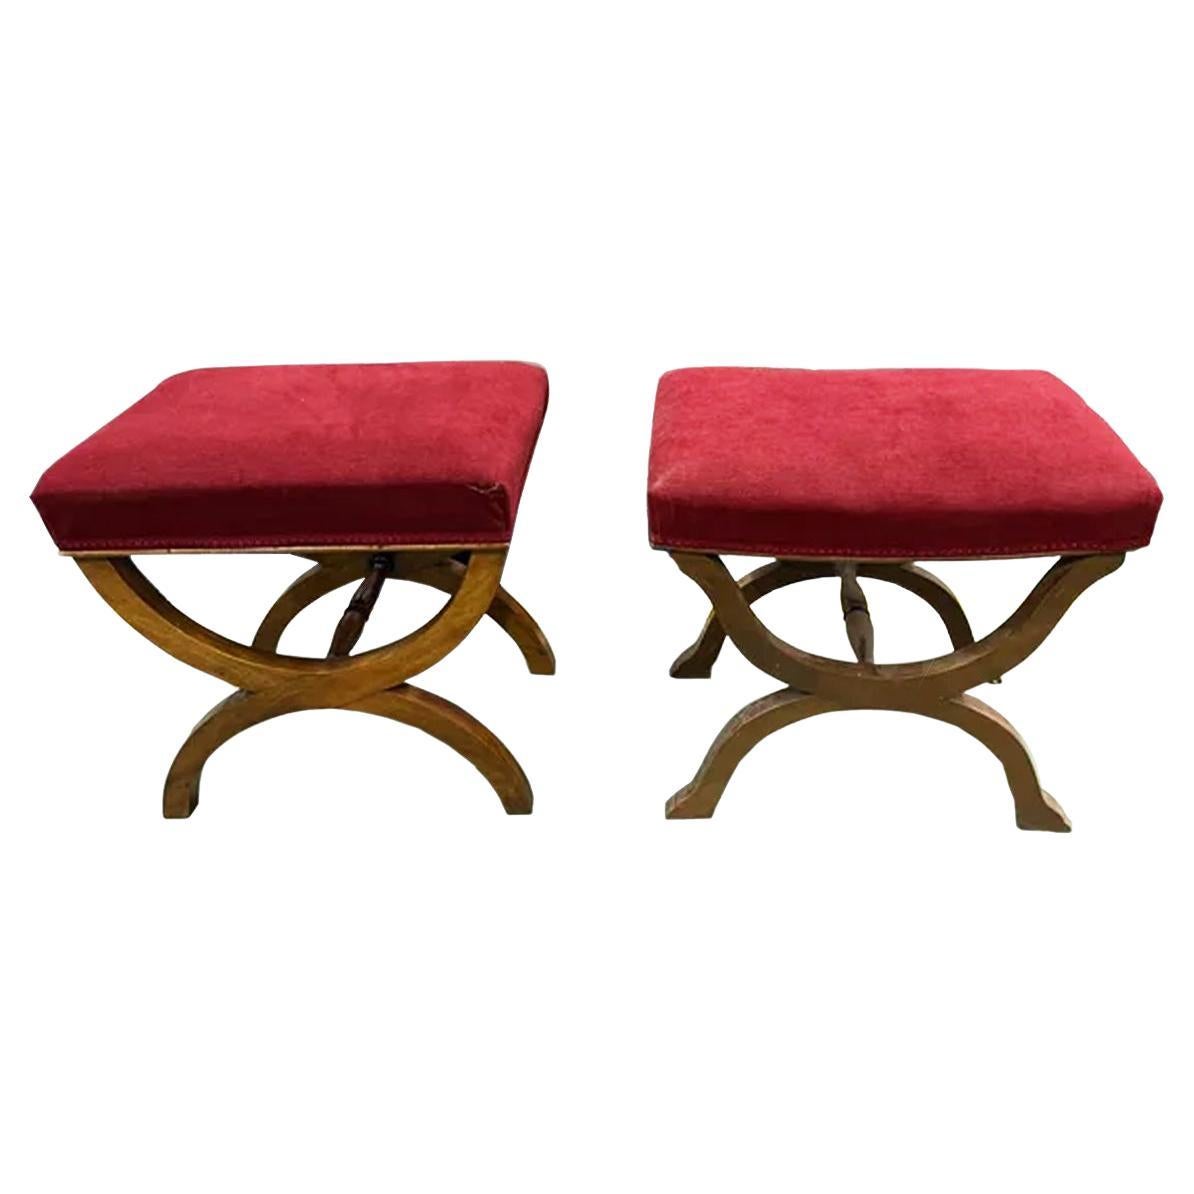 Stools Beautiful Walnut and Maroon Velvet Ottomans and Poufs For Sale